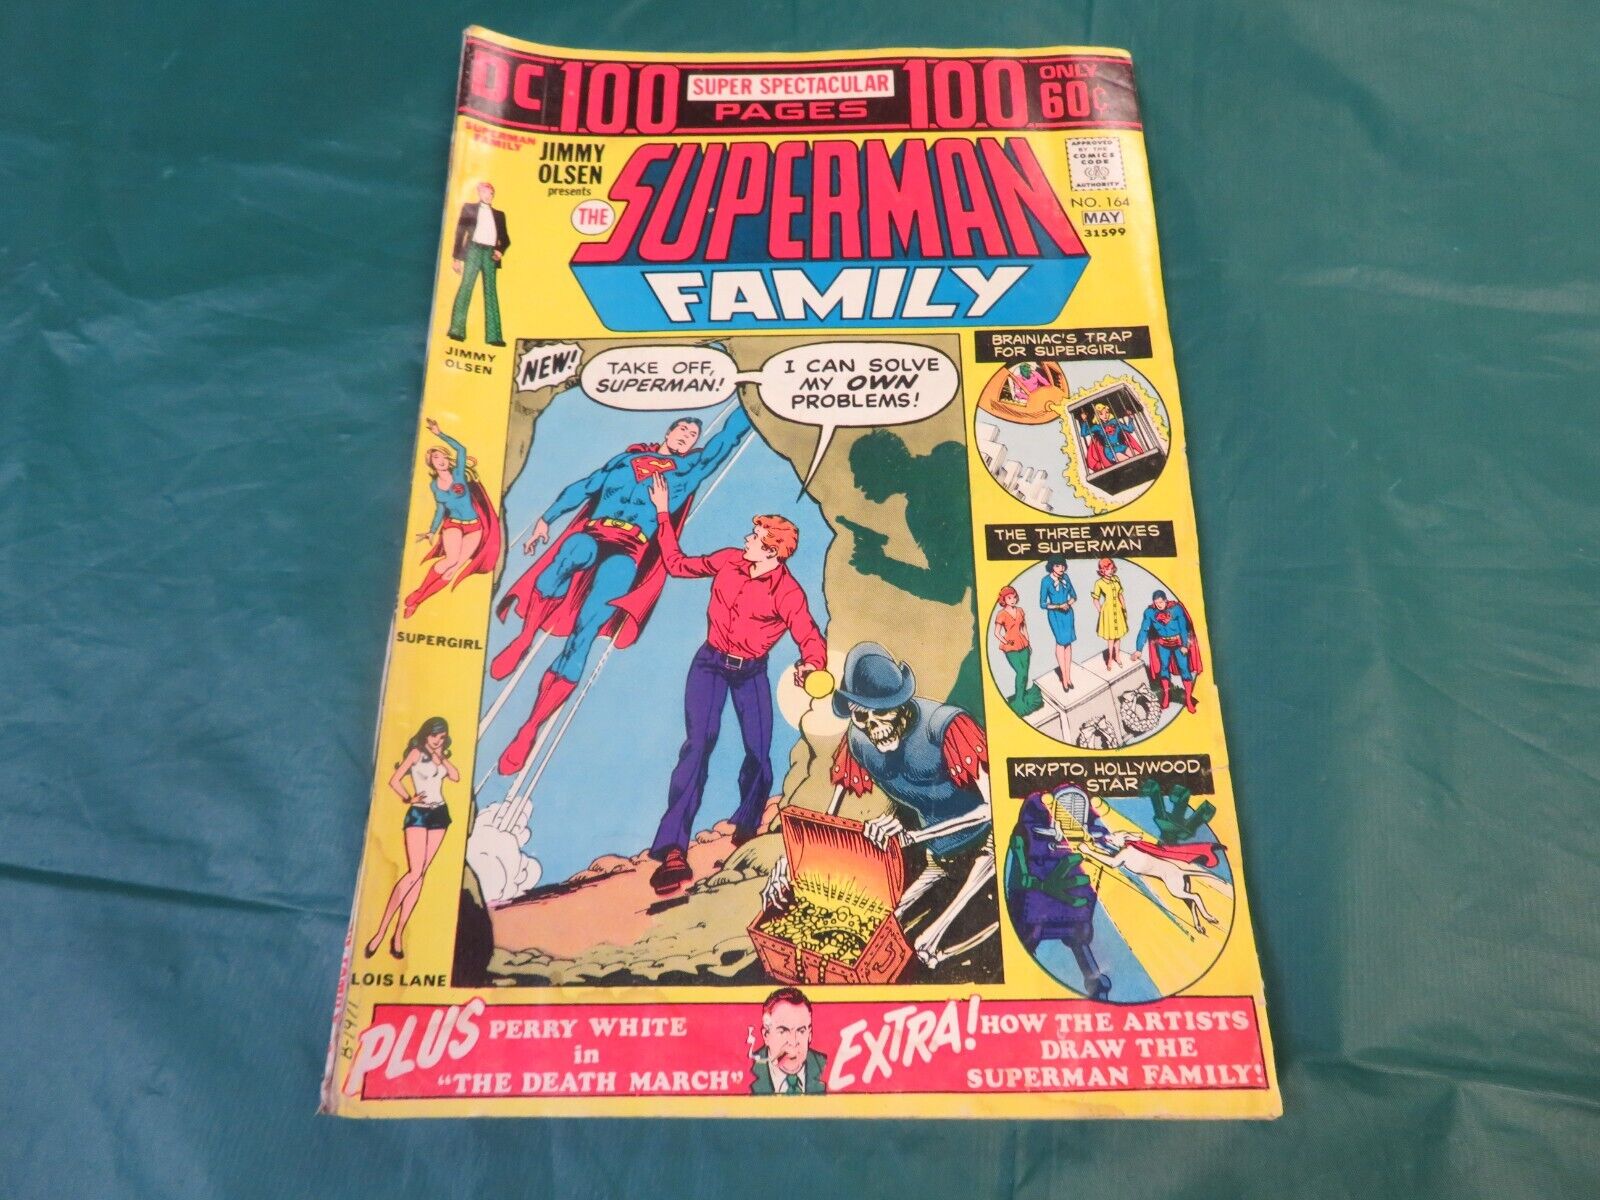 DC Comics: 100-Pages: The Superman Family #164 (April-May 1974)